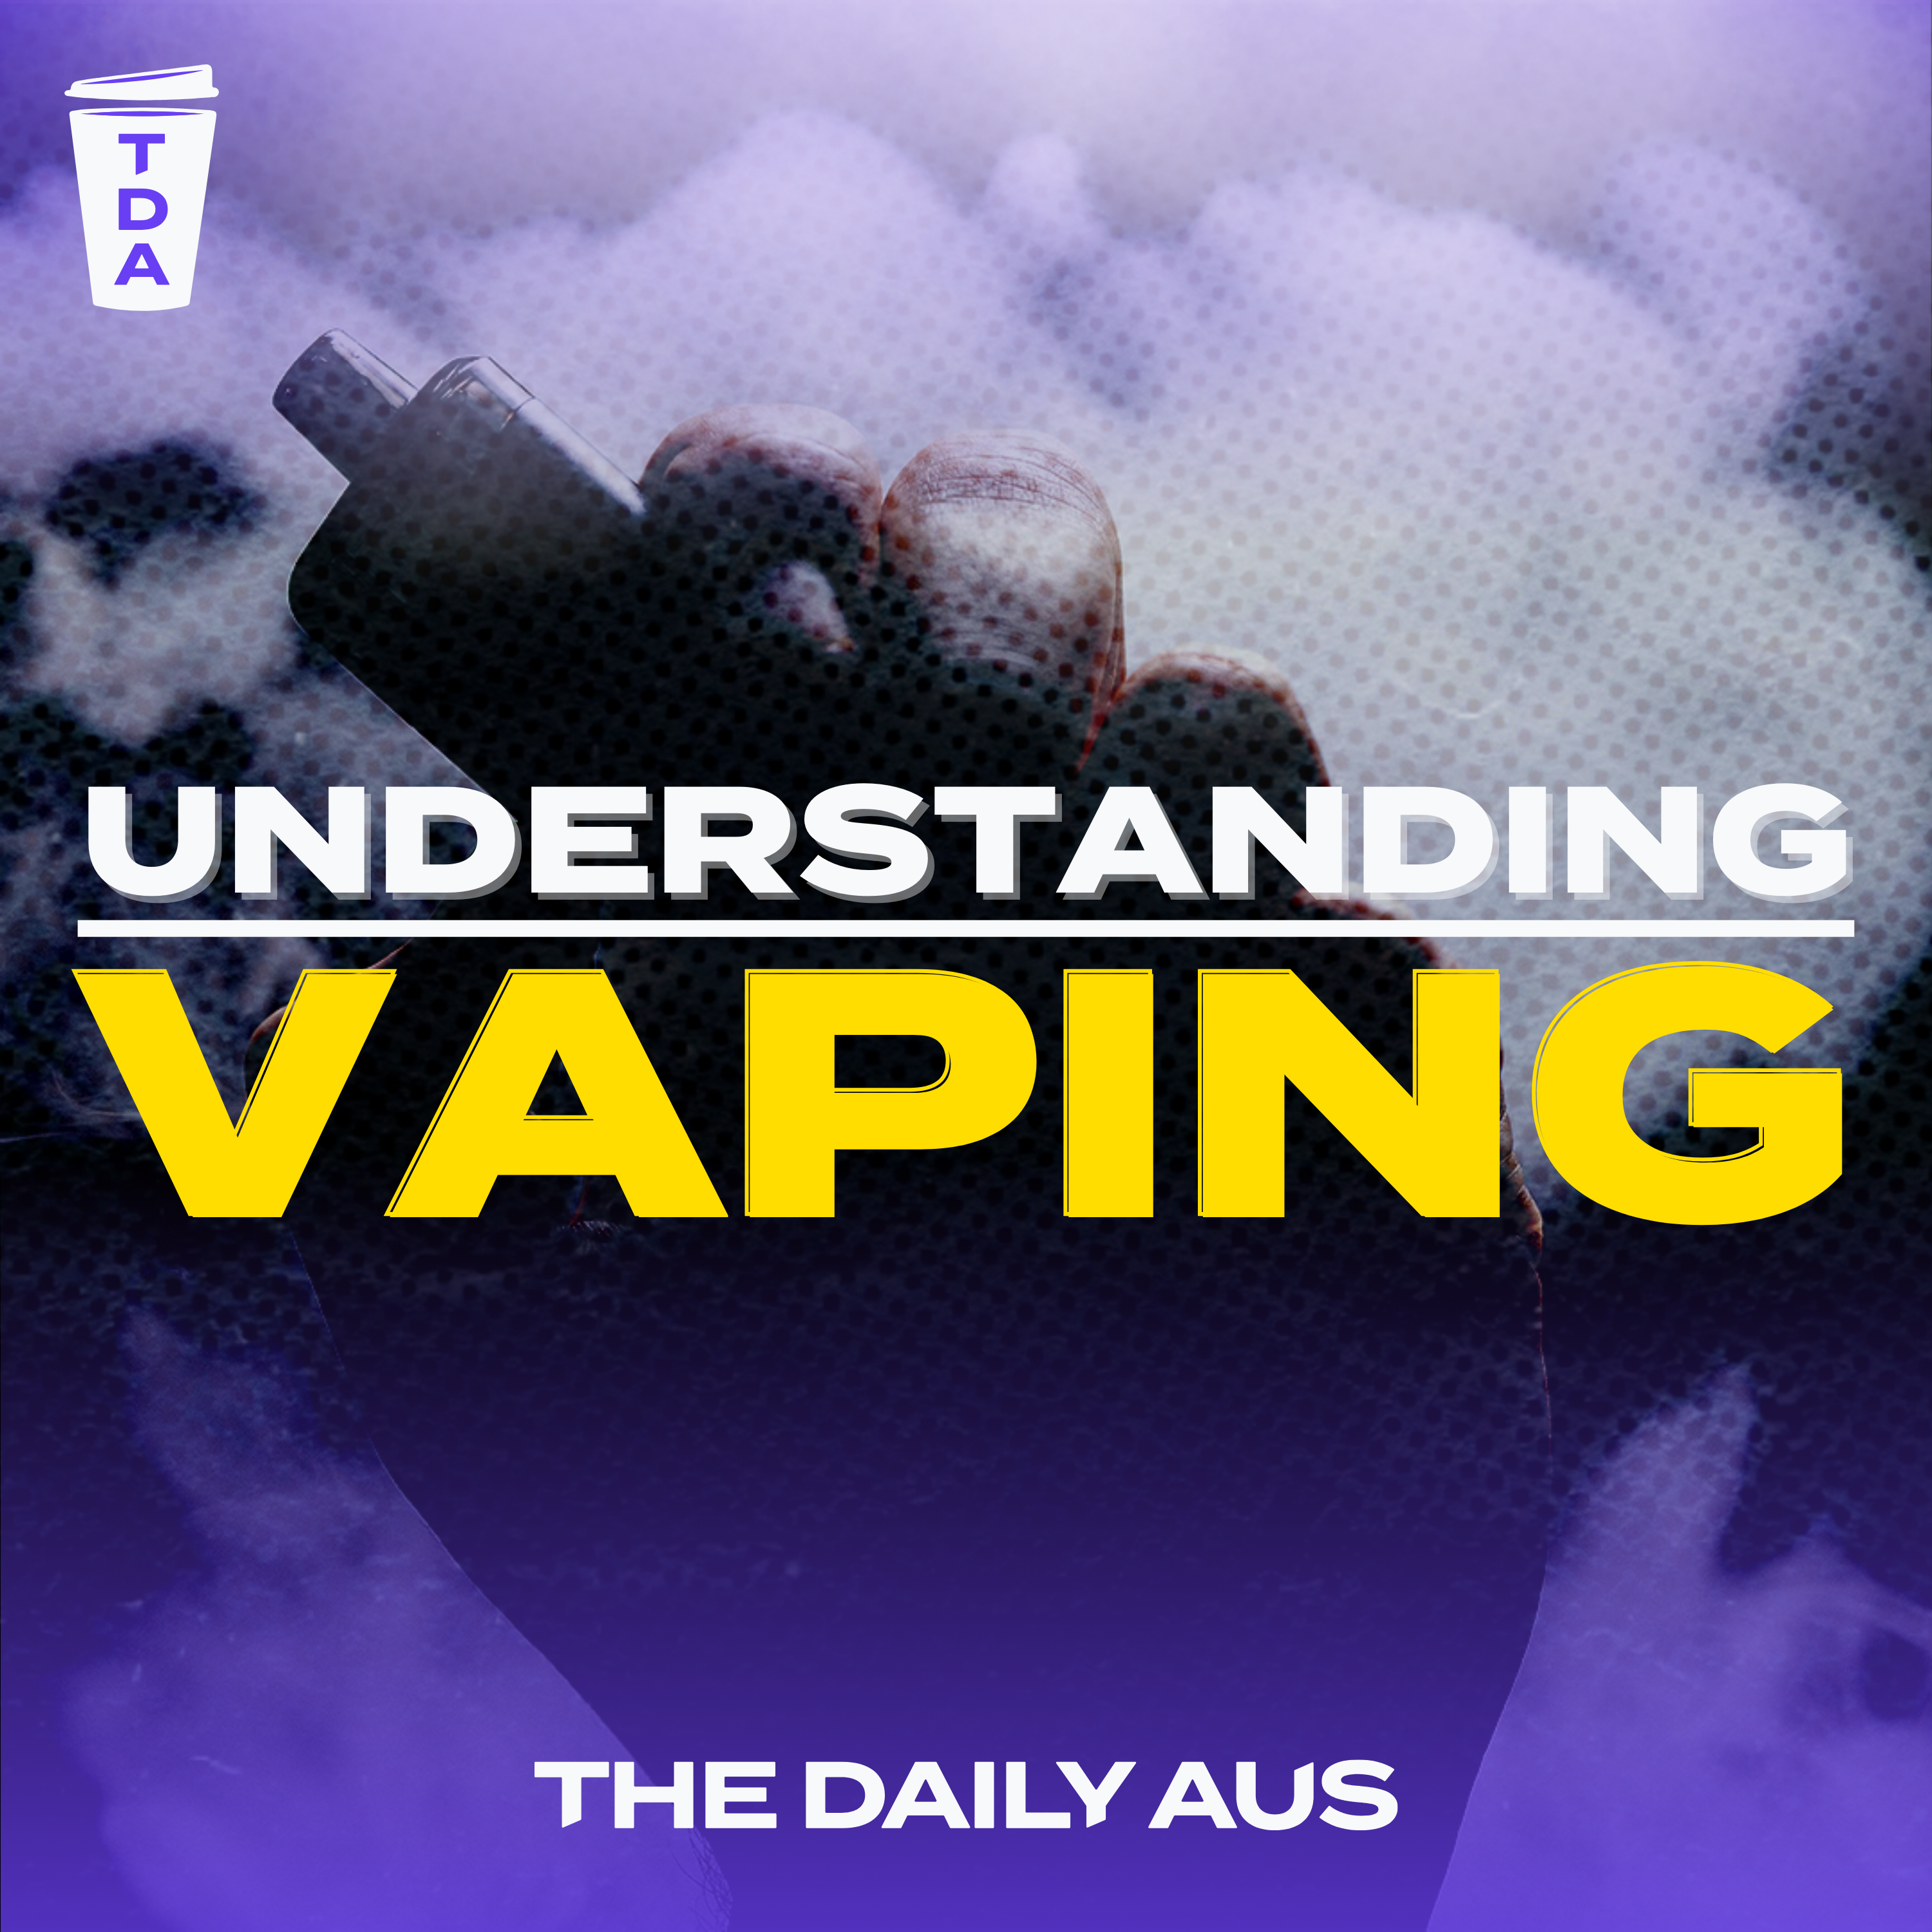 How illegal are vapes?